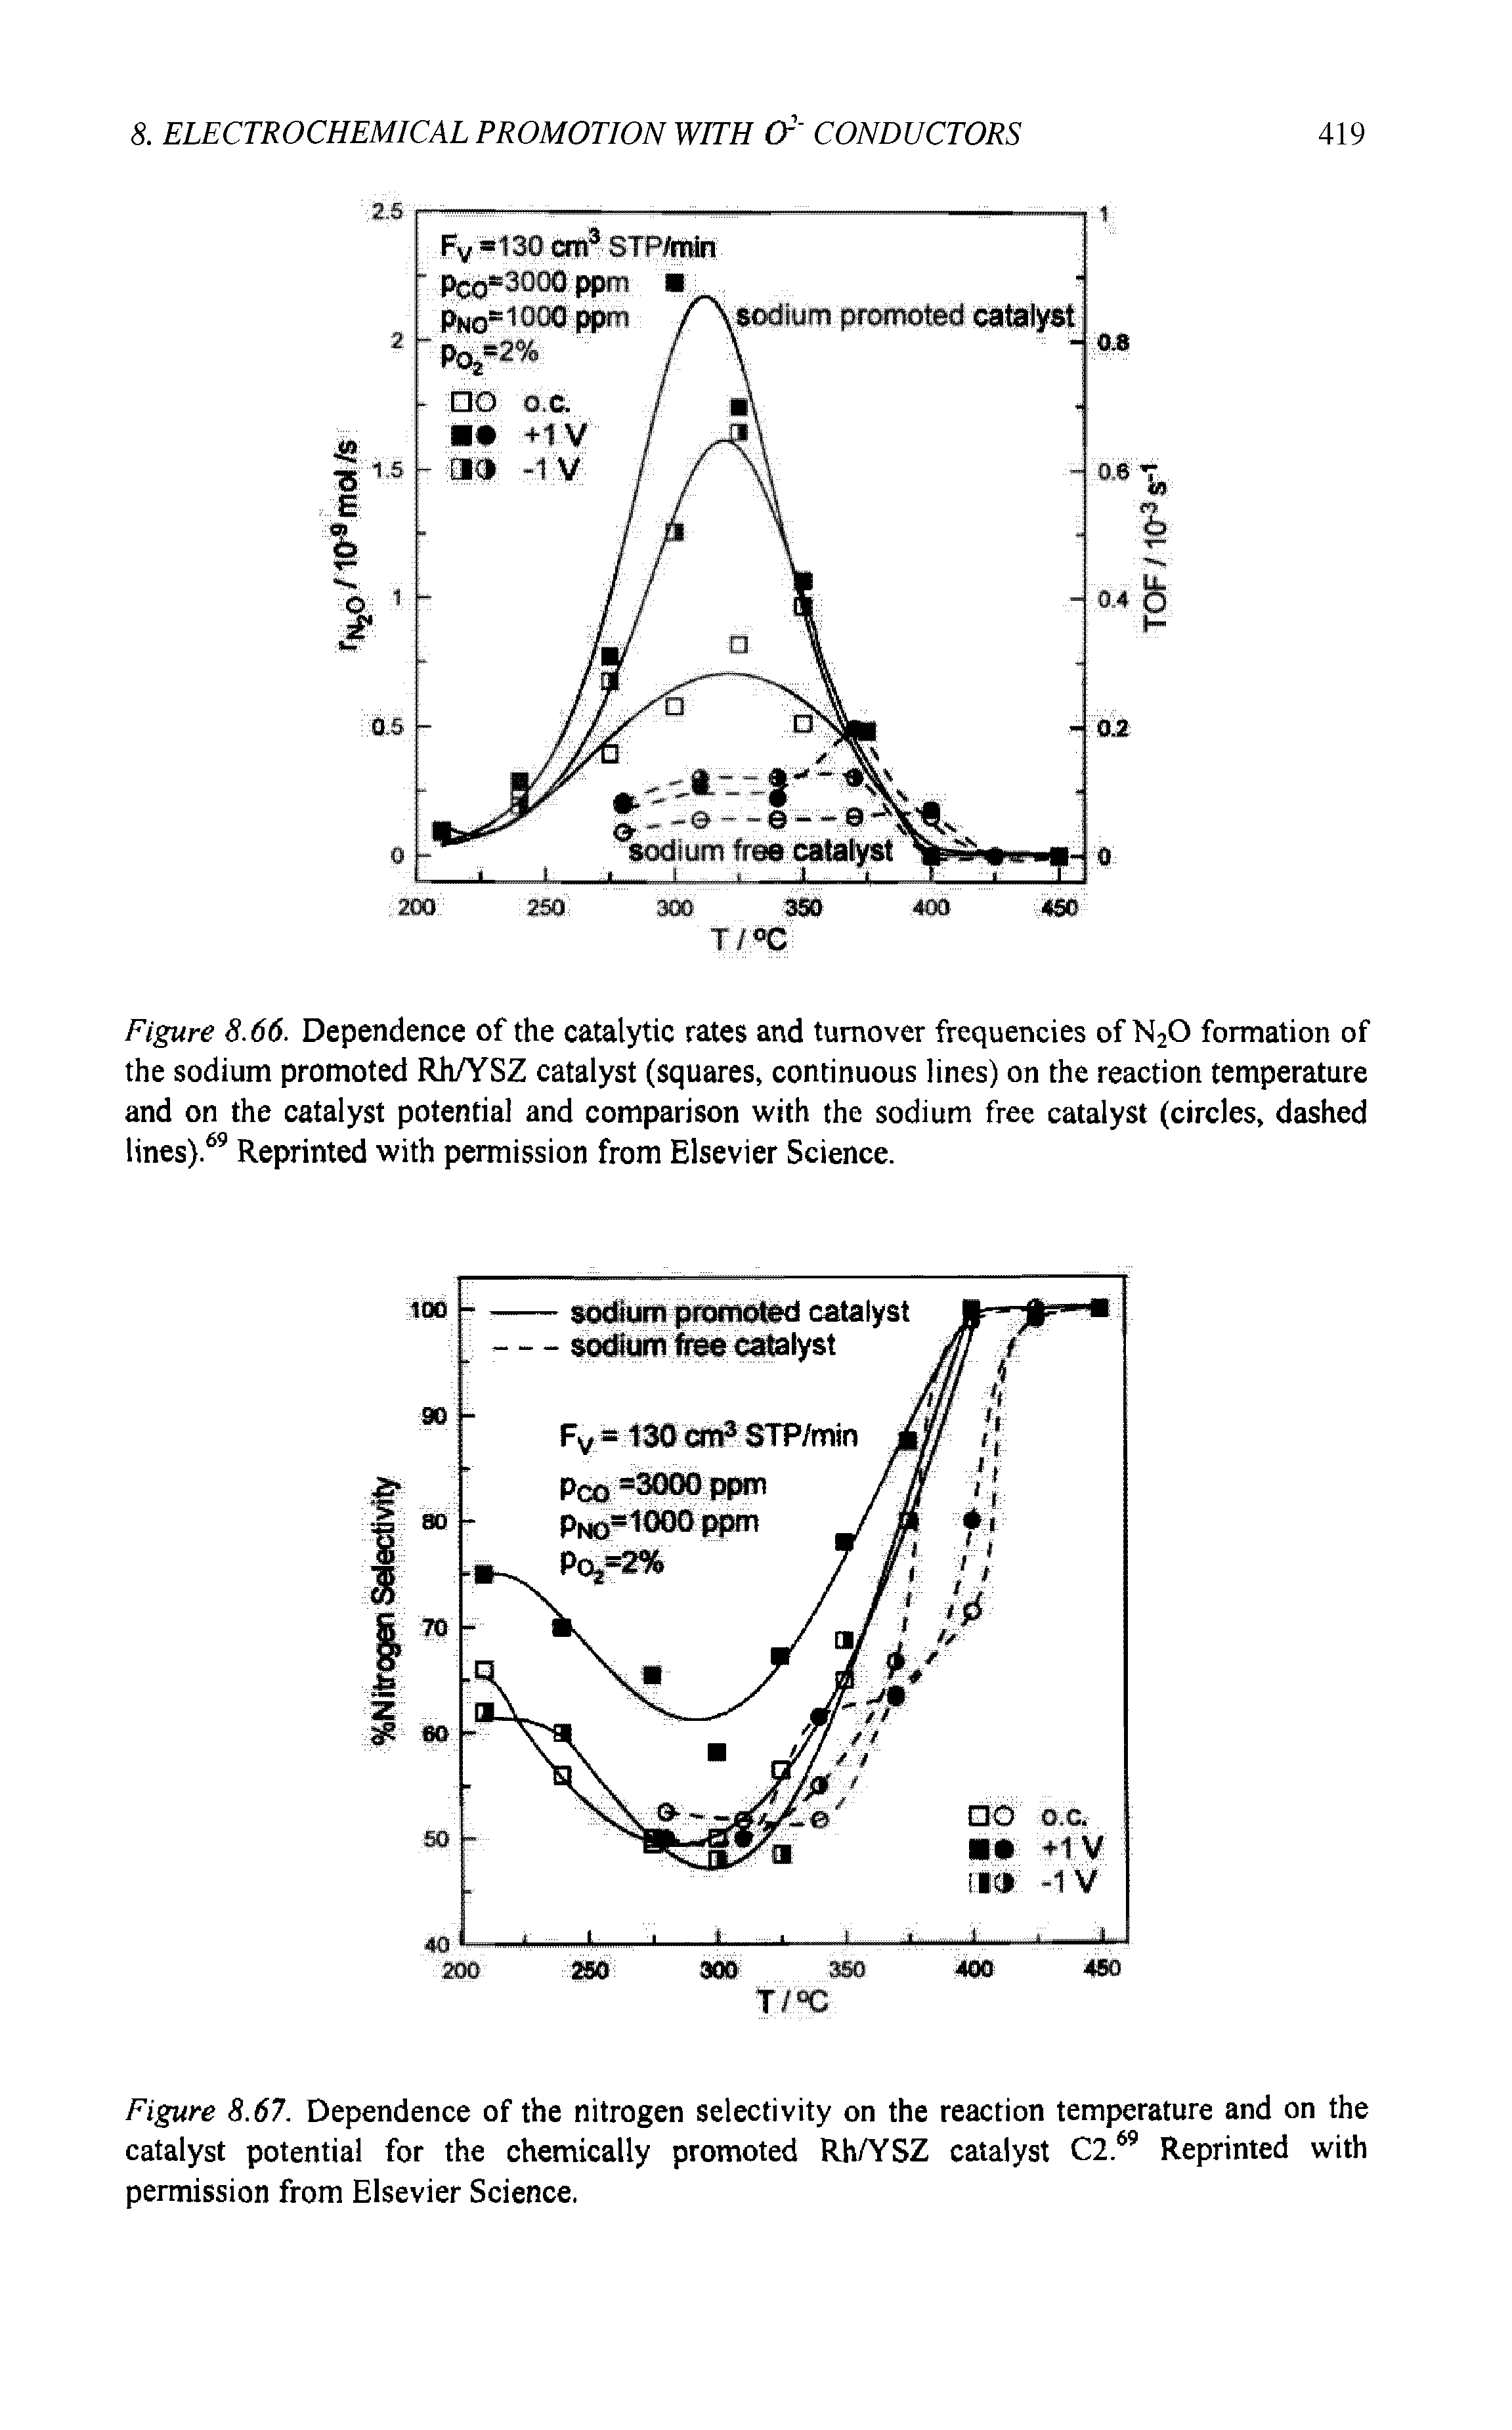 Figure 8.66. Dependence of the catalytic rates and turnover frequencies of N20 formation of the sodium promoted Rh/YSZ catalyst (squares, continuous lines) on the reaction temperature and on the catalyst potential and comparison with the sodium free catalyst (circles, dashed lines).69 Reprinted with permission from Elsevier Science.